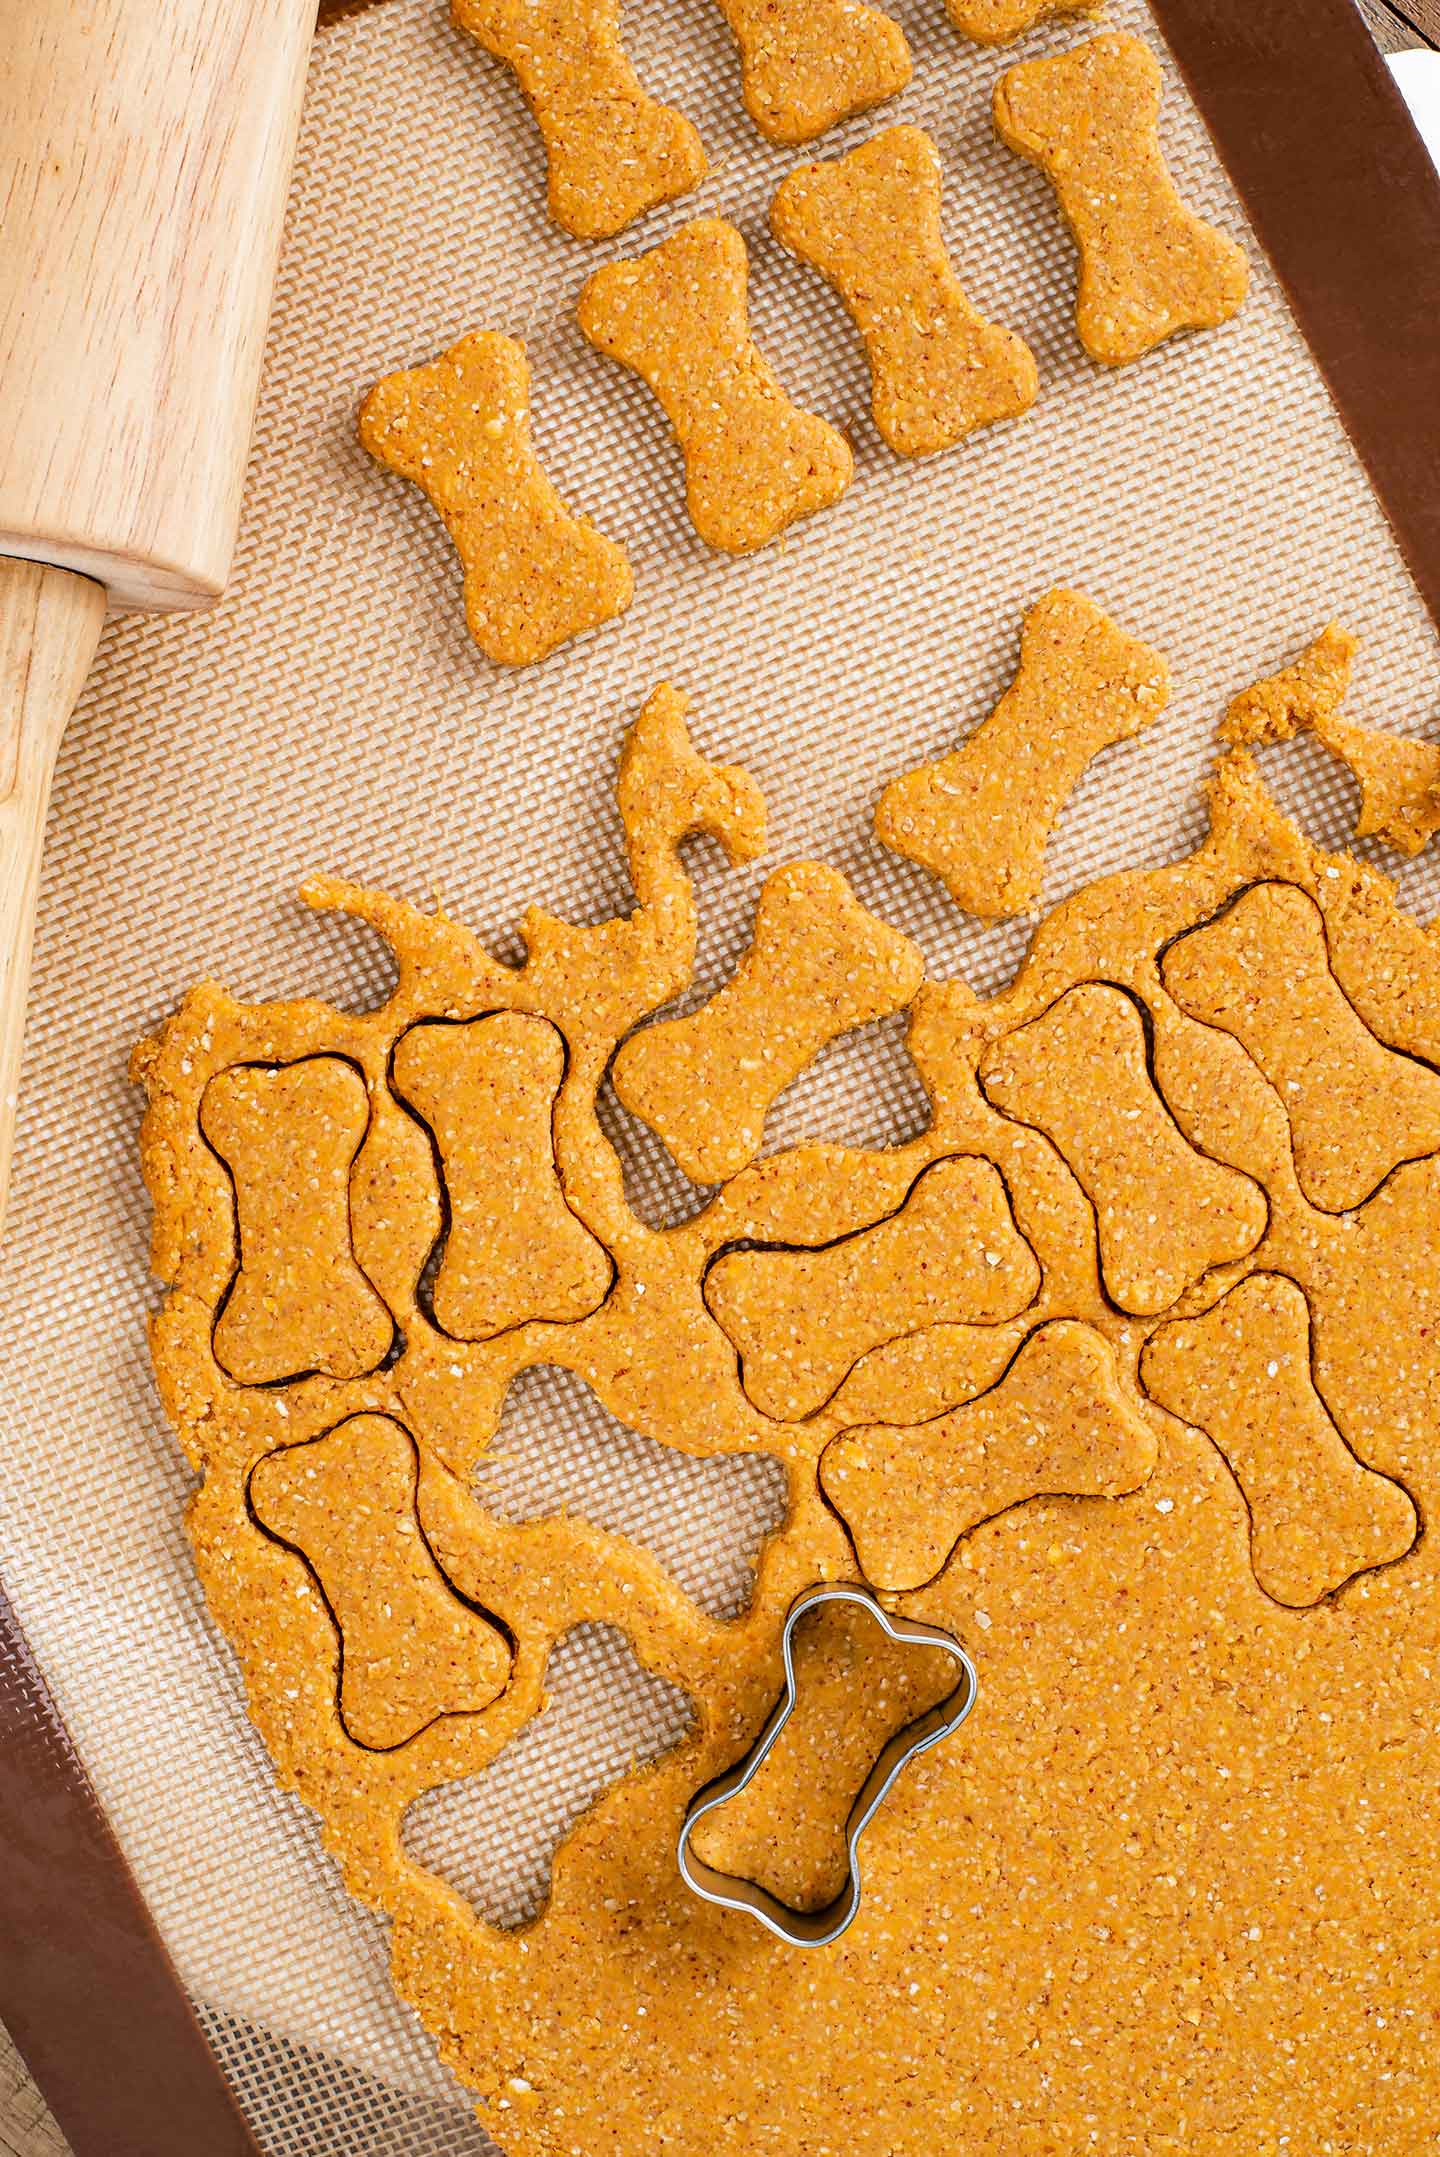 Top down view of rolled dog treat dough on a silicone mat with a rolling pin. A small dog bone cookie cutter has cut biscuit shapes into the dough.